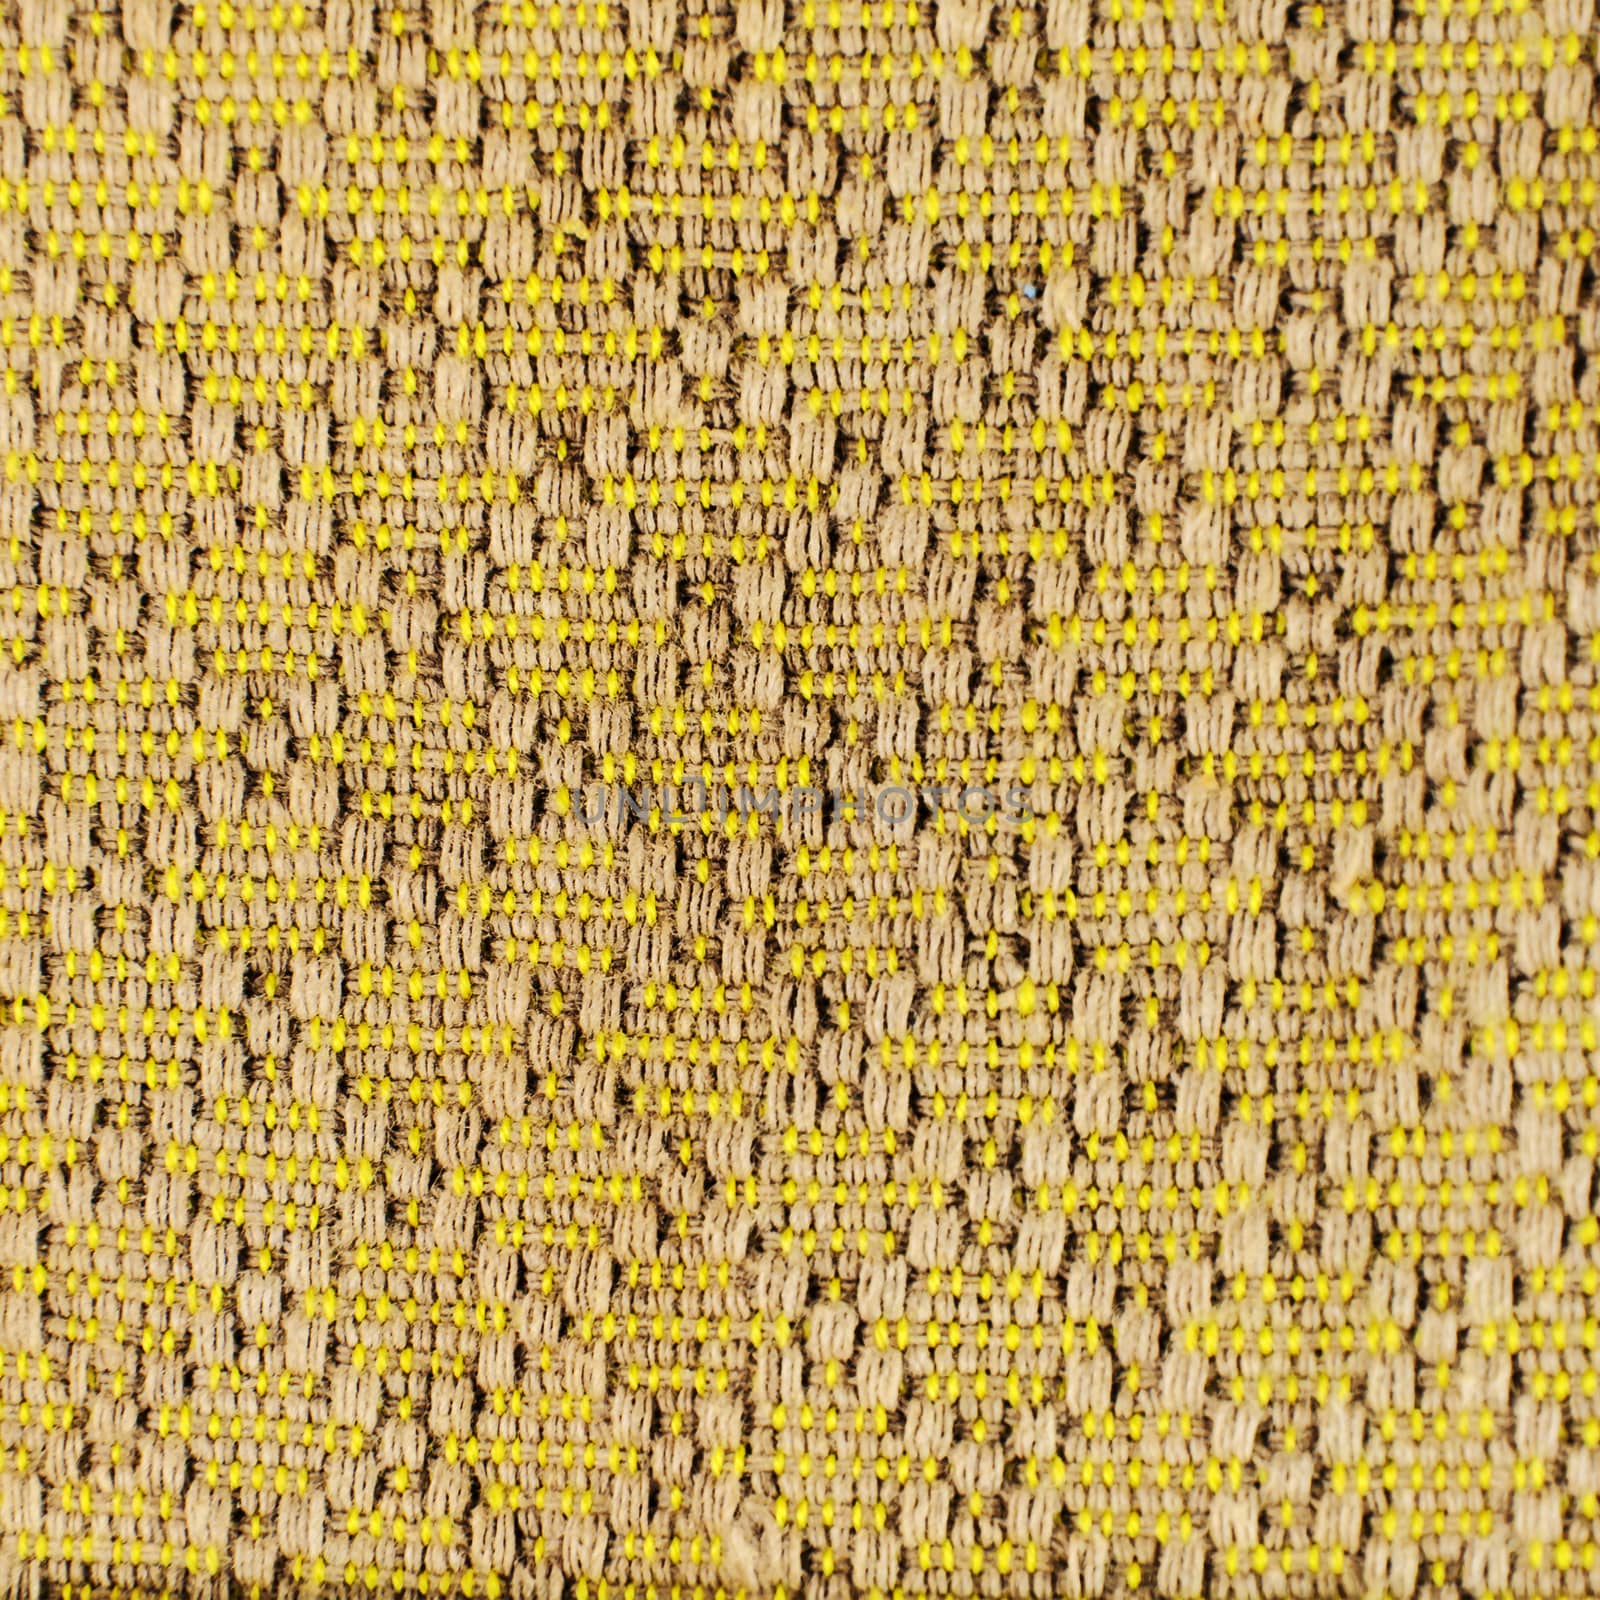 Detail of hand woven cotton fabric